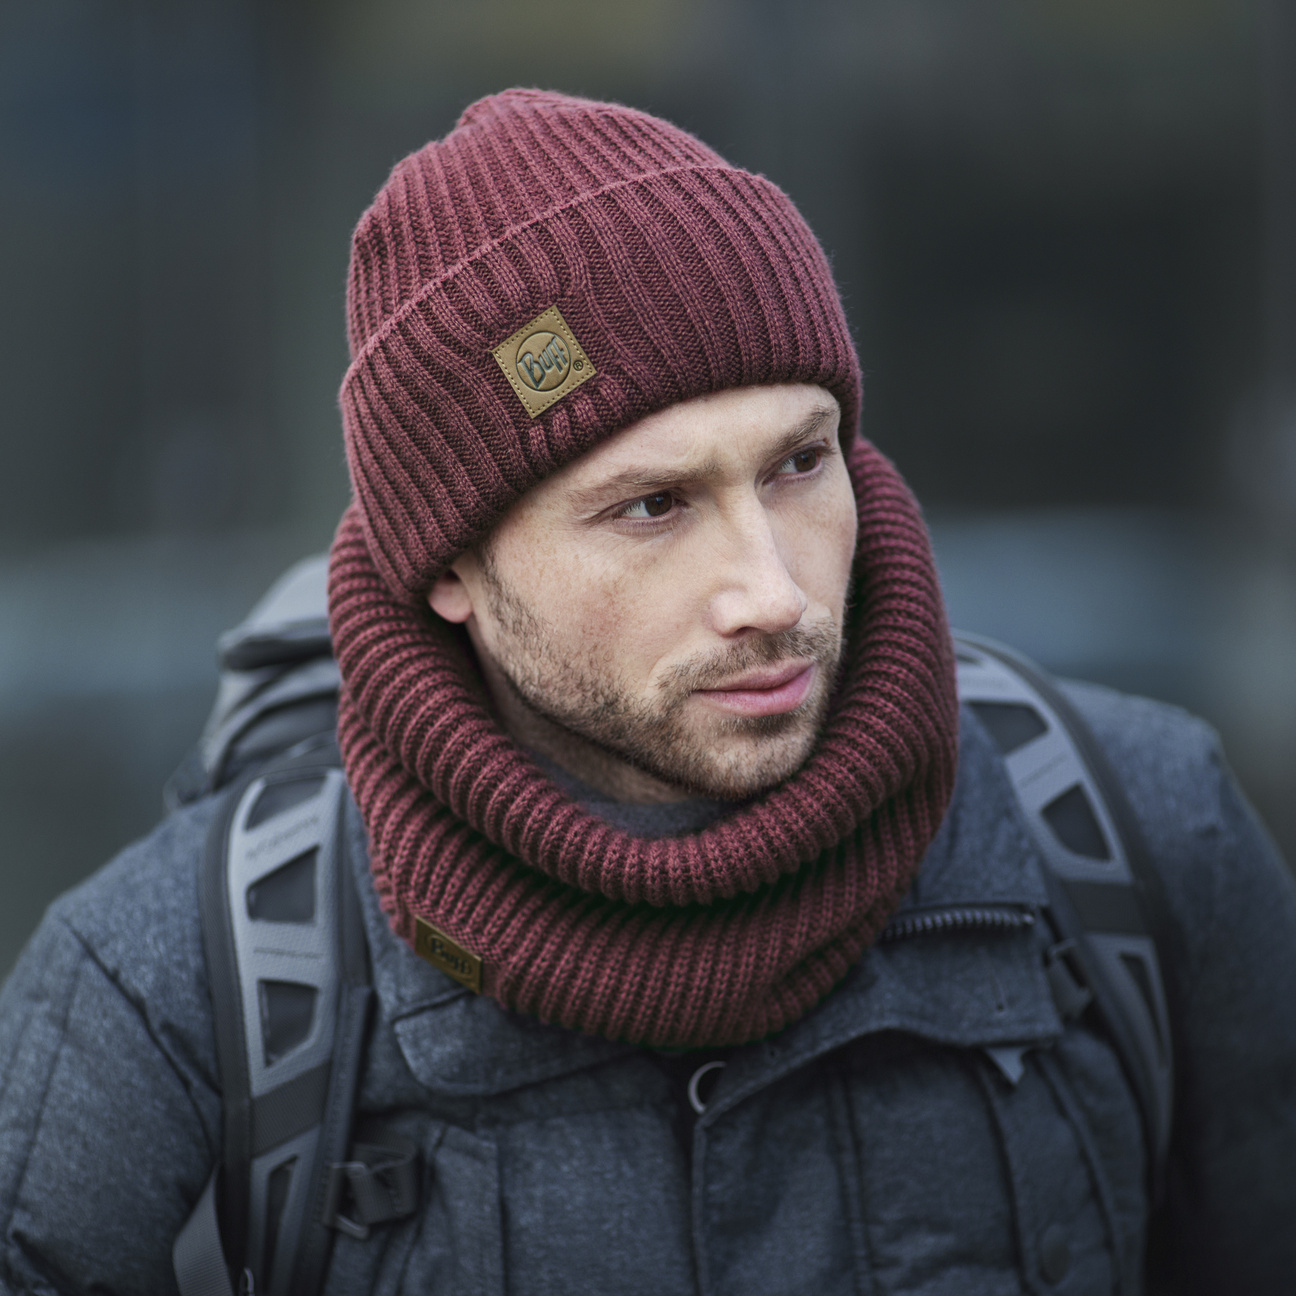 Ervin Merino Knit Hat with Cuff by BUFF